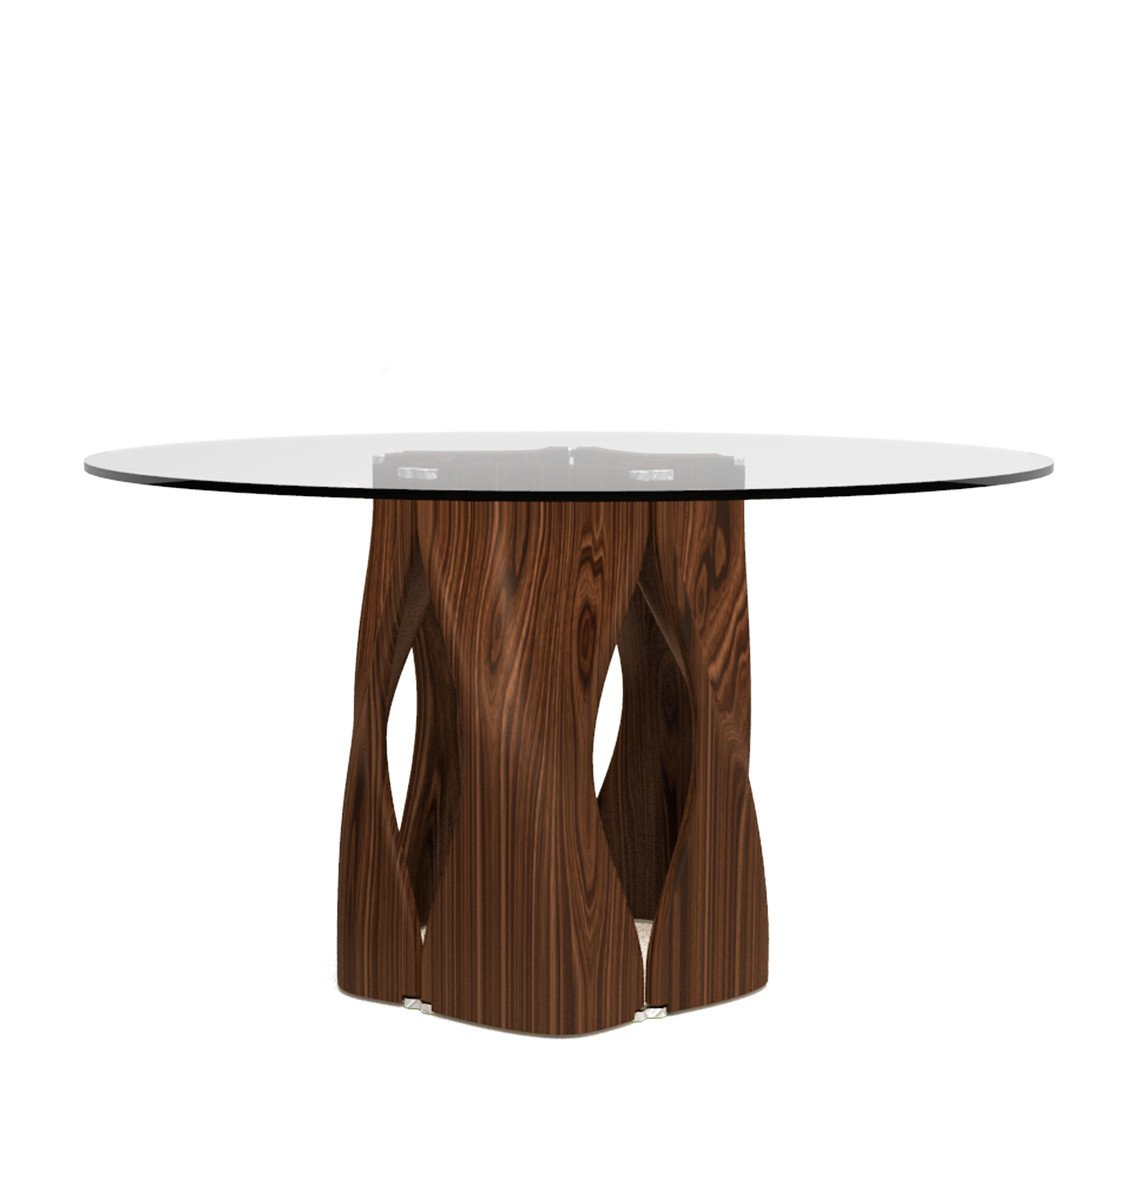 Mac's Table dining from Tonon, designed by Mac Stopa